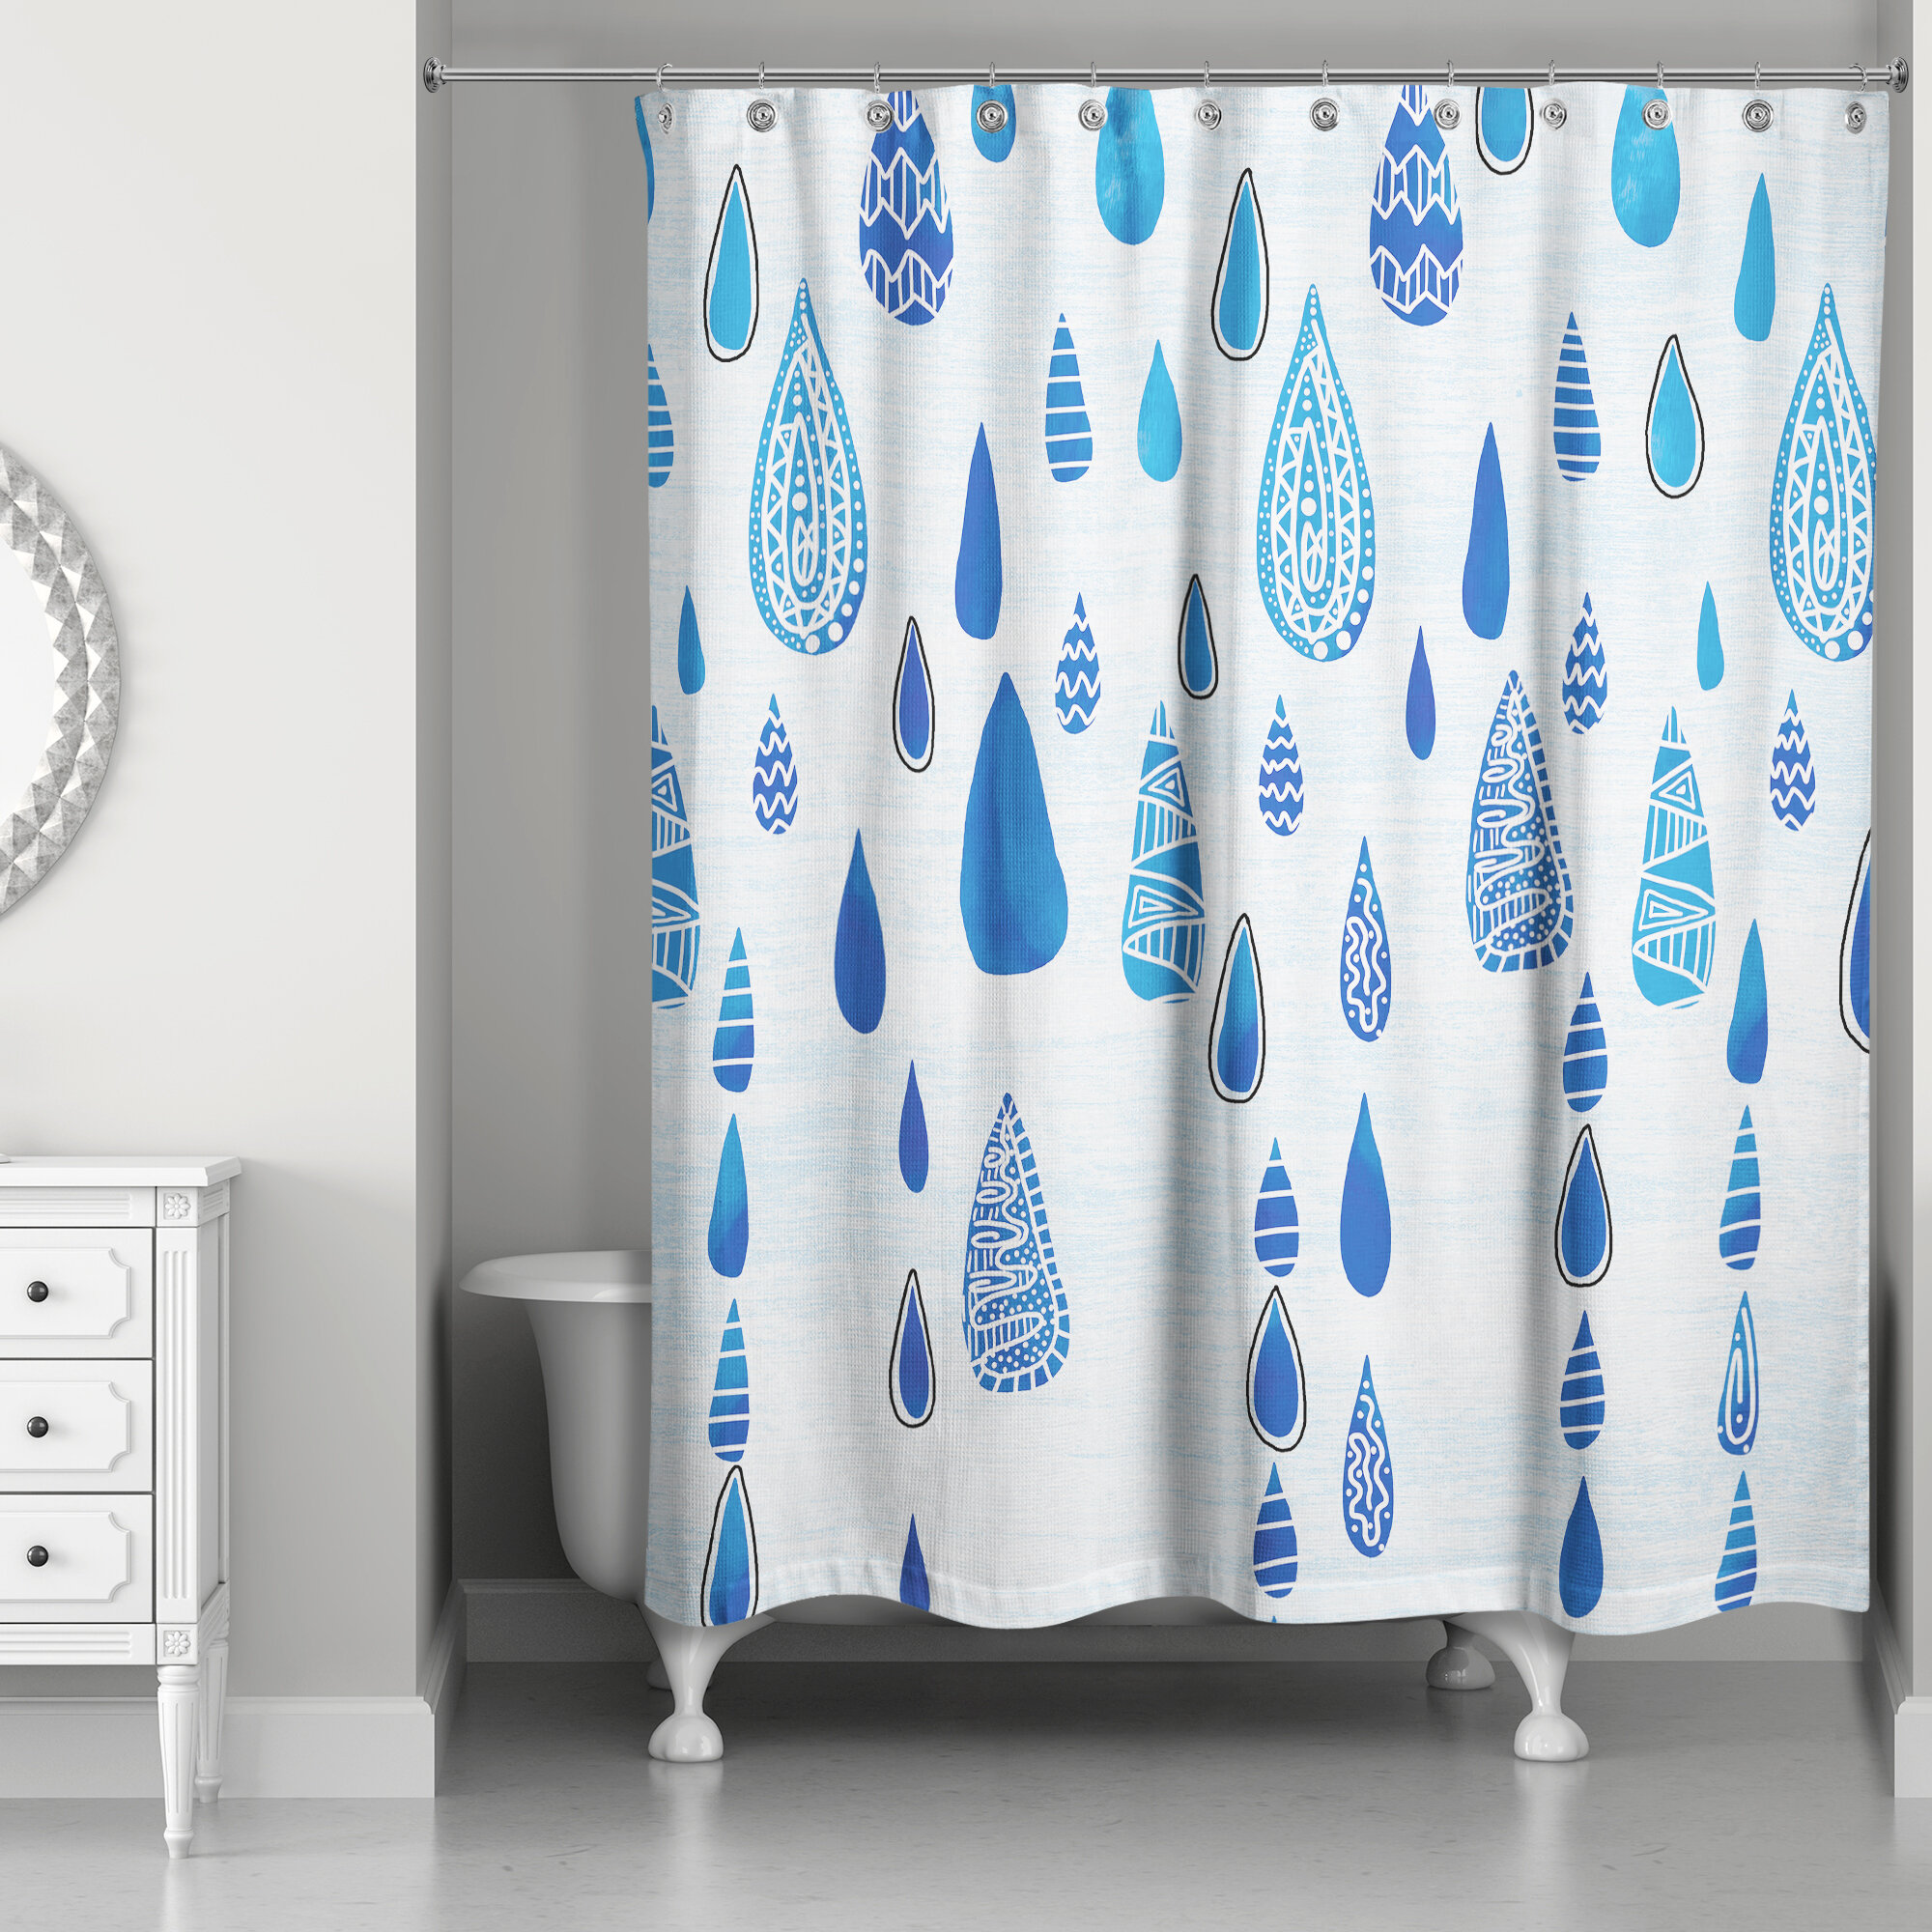 Colorful Shower Curtain Abstract Raindrops Print for Bathroom 